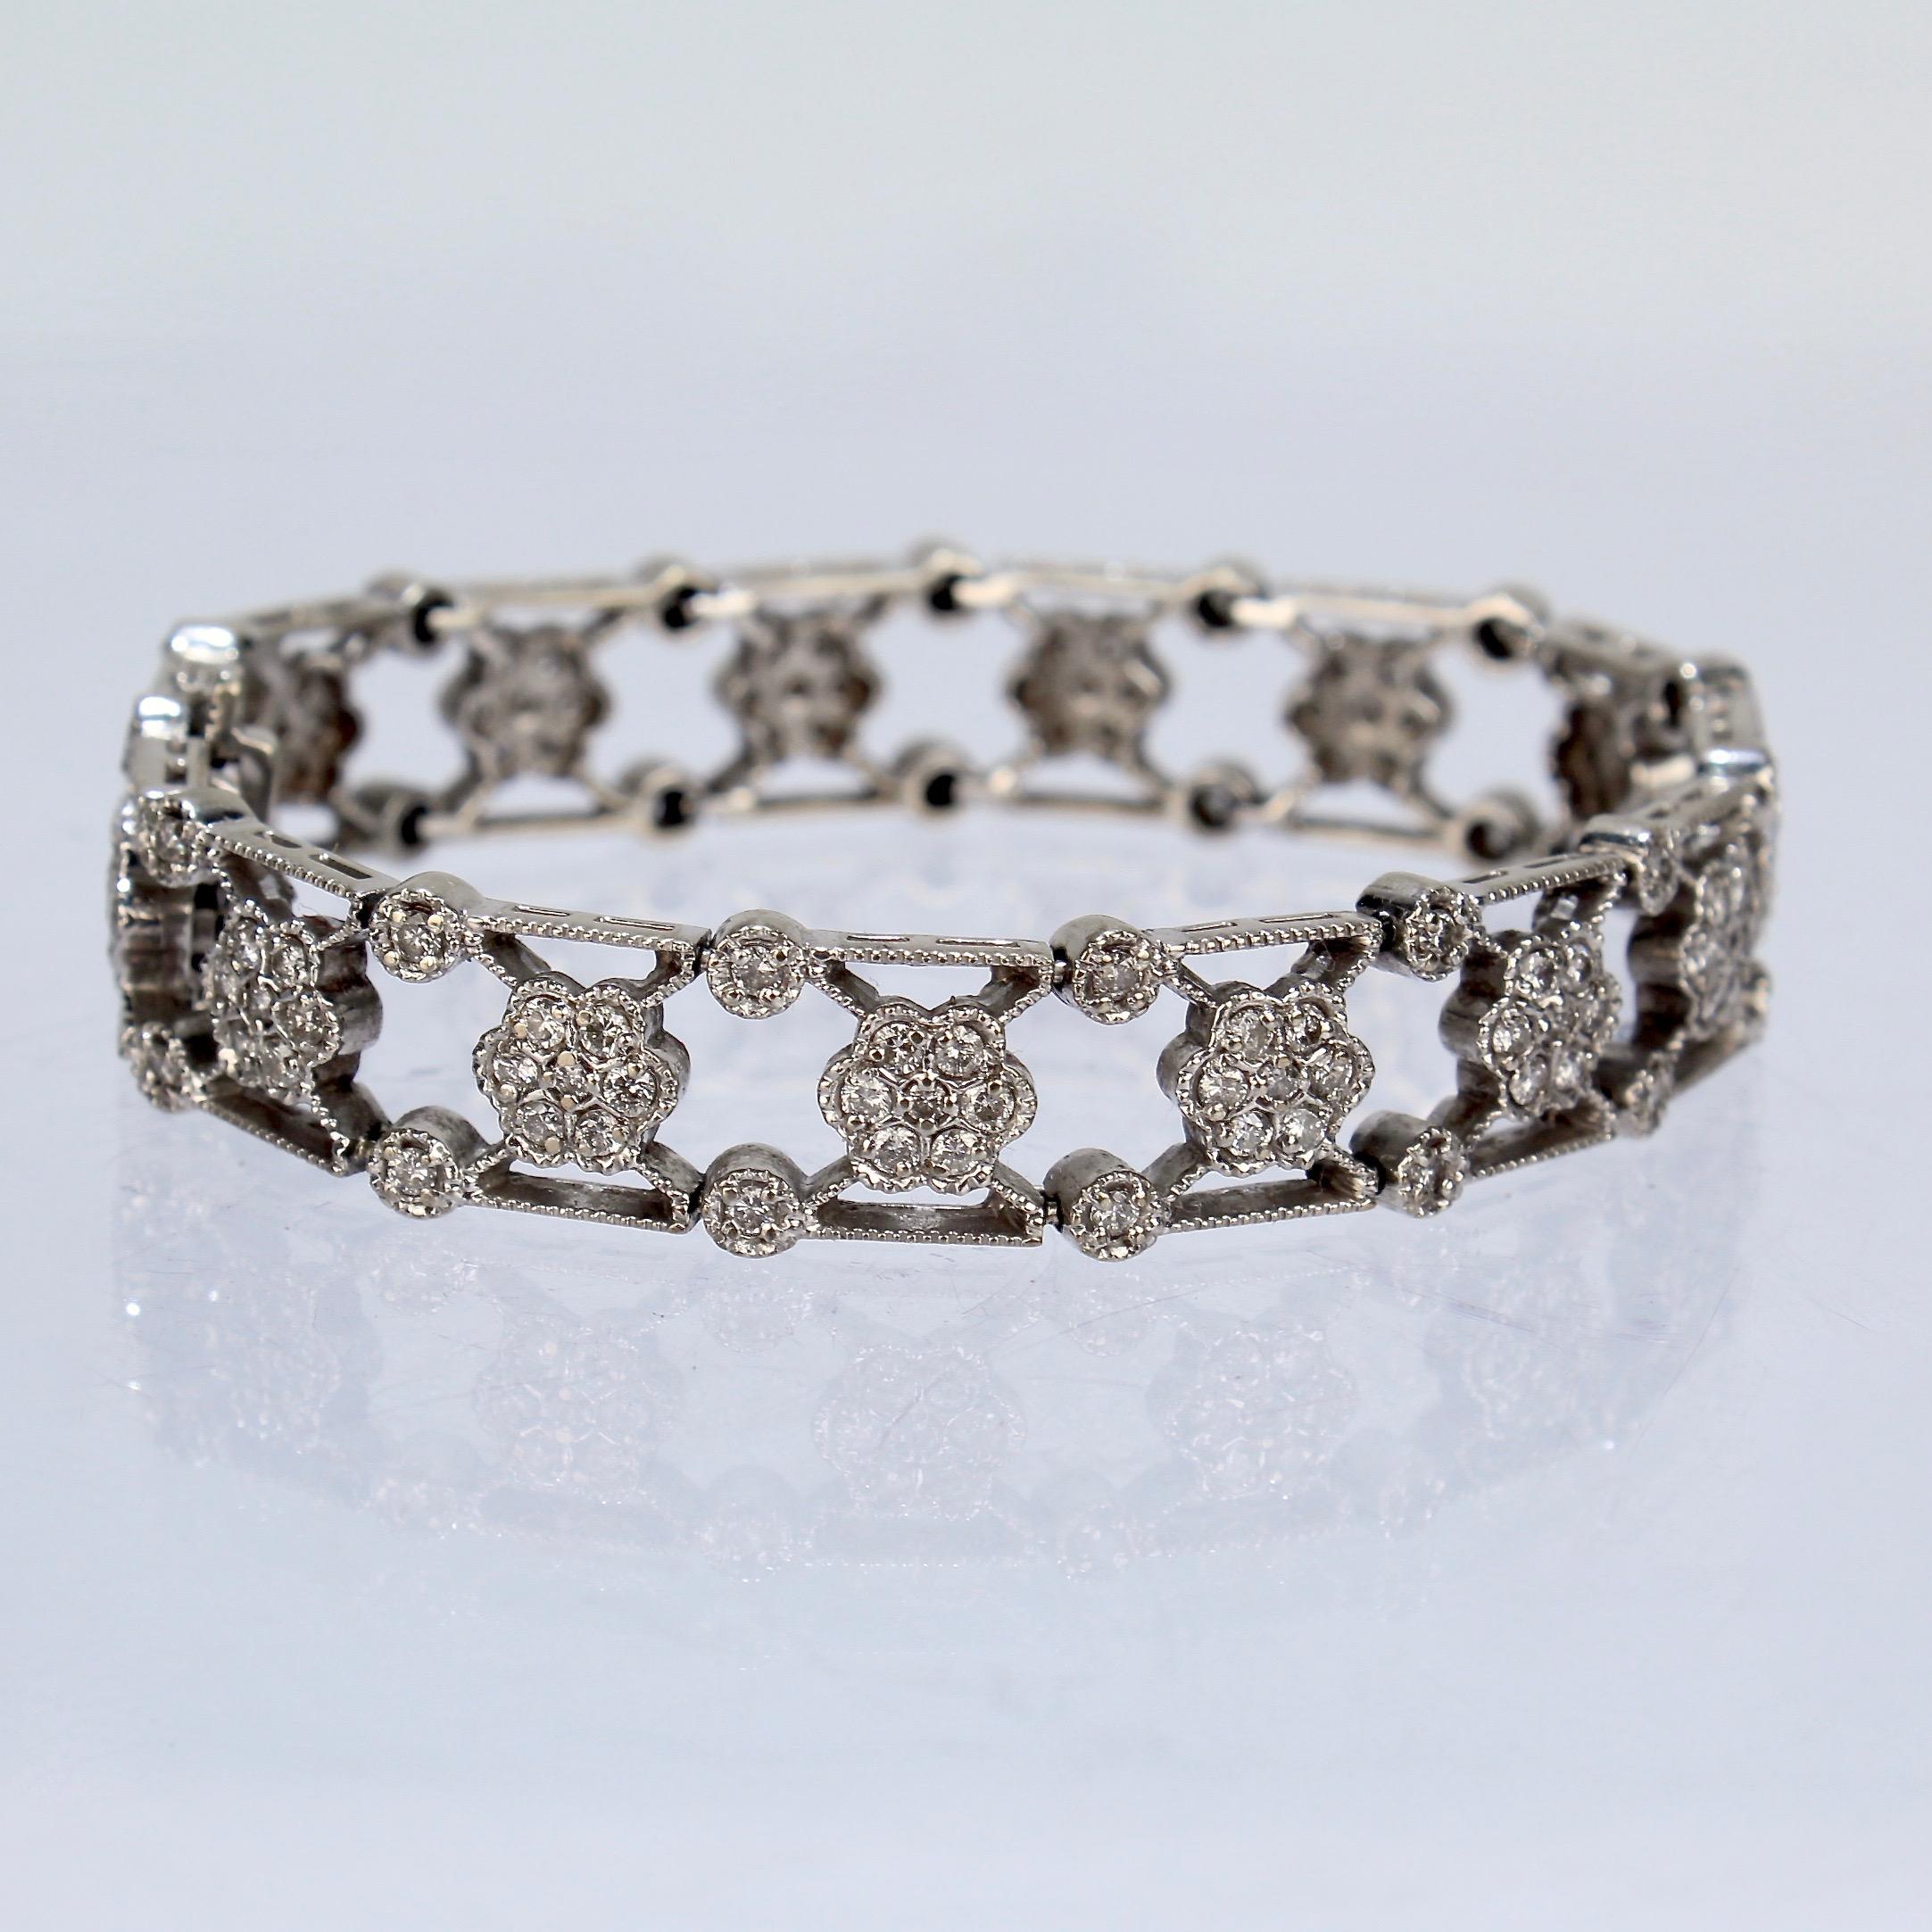 A fine 14K white gold and diamond bracelet.

In an intricate X-link pattern set with florets of diamonds centered on the X and punctuated by bezel set diamonds on its edges.

An eye-catching bracelet!

Marked 14k for gold fineness. 

Length: ca. 172